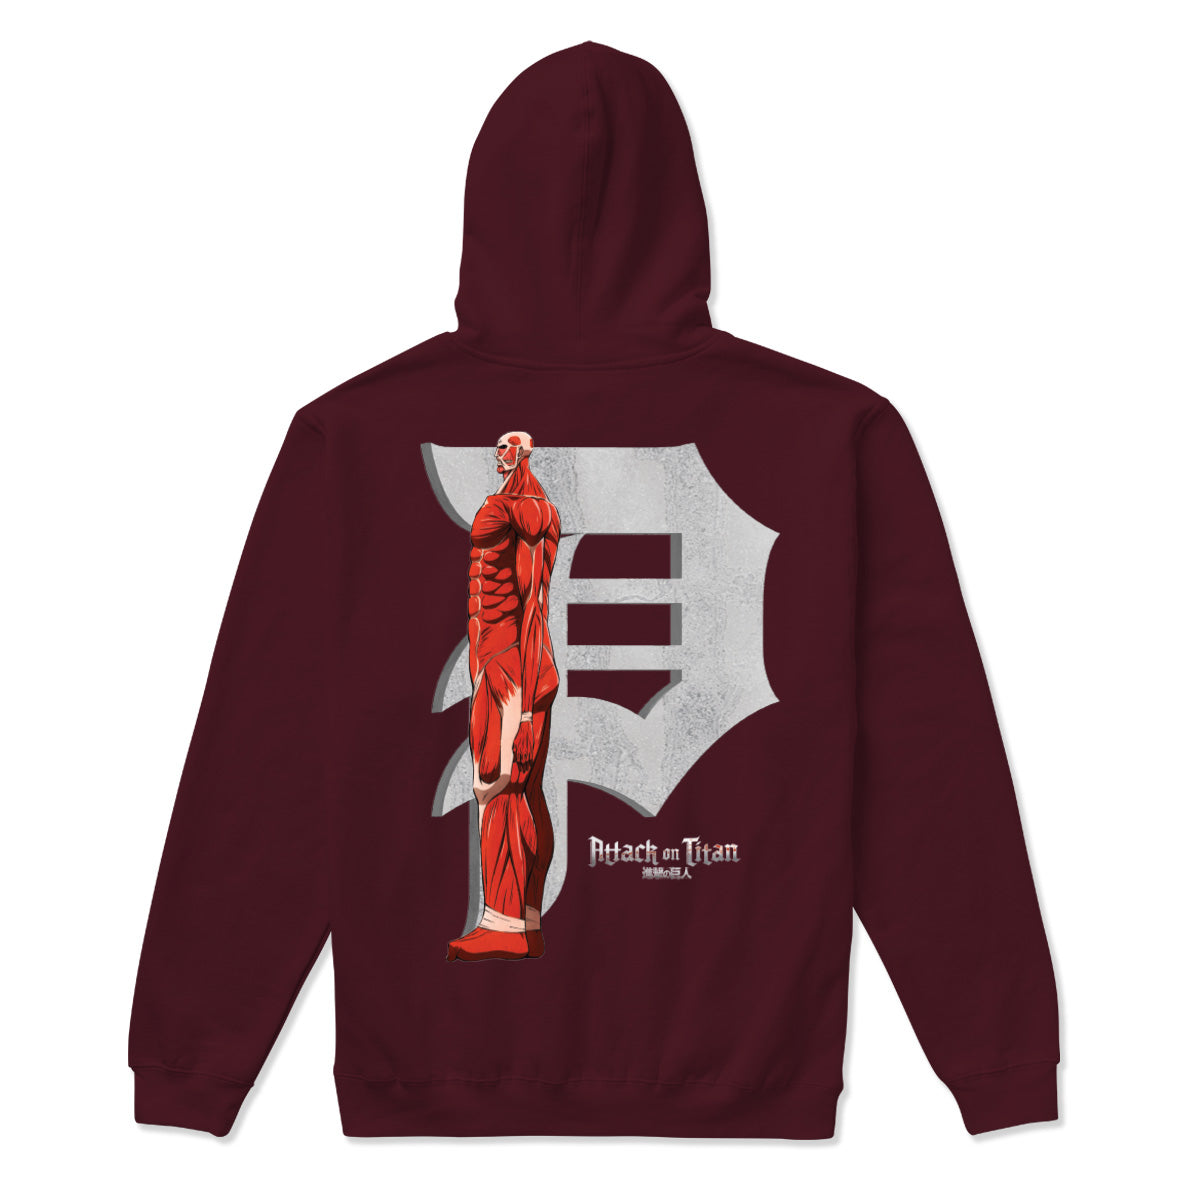 Primitive x Titans Colossal Dirty P Hoodie - Burgundy image 2